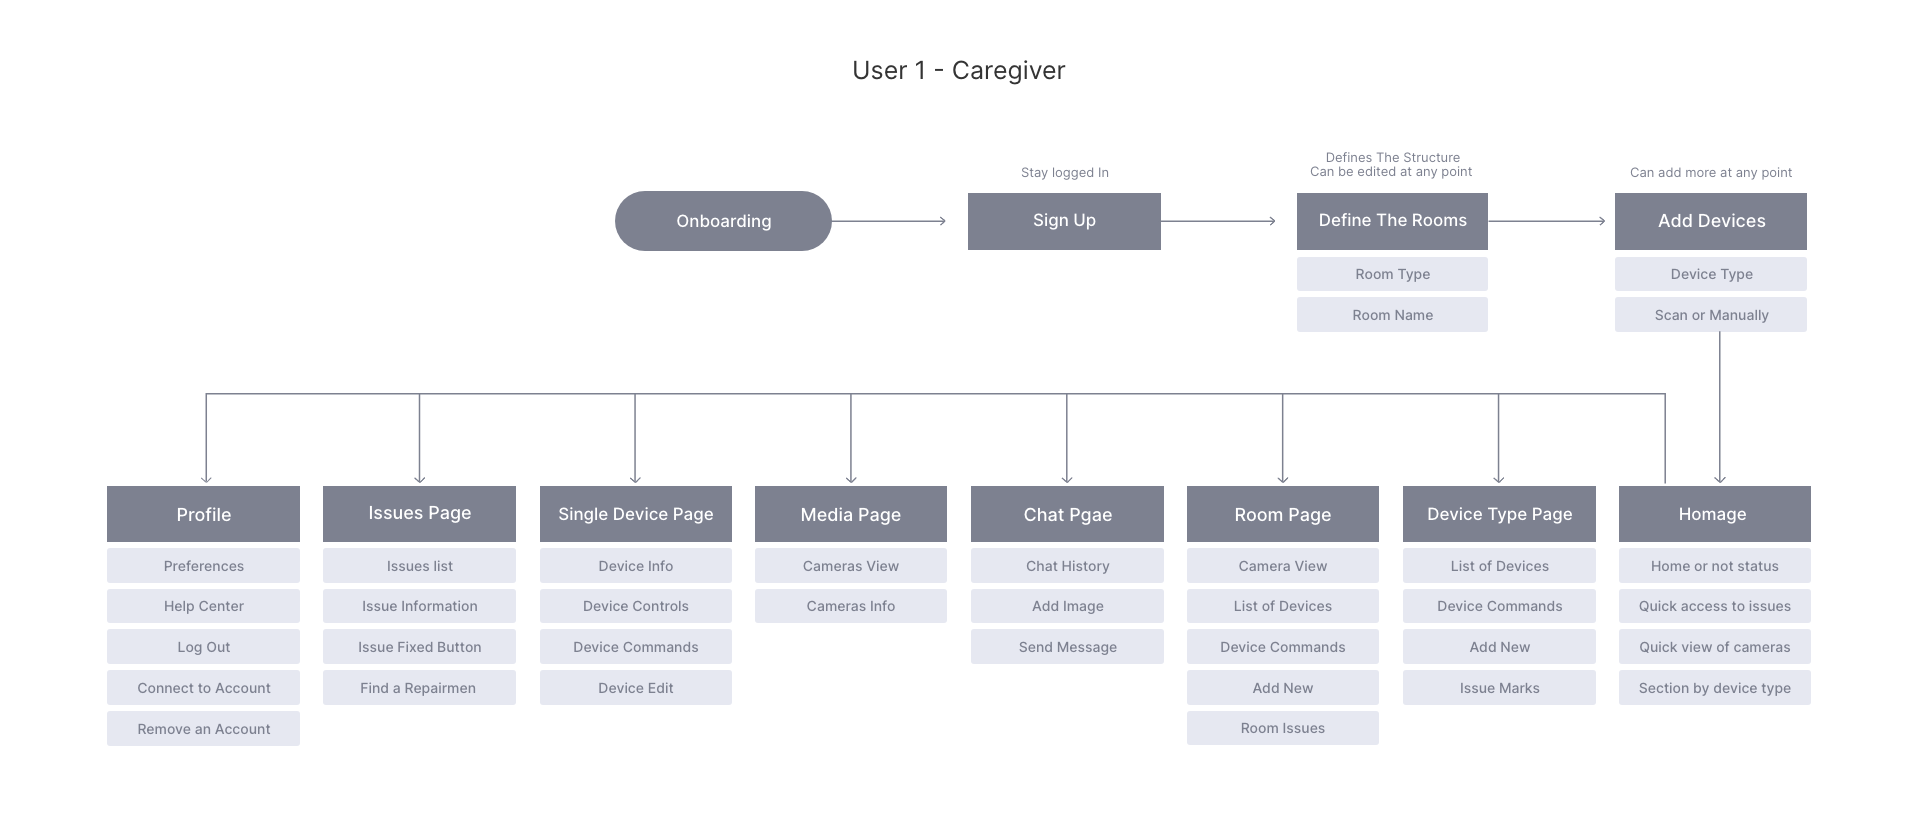  Mapping the screens for the caregiver